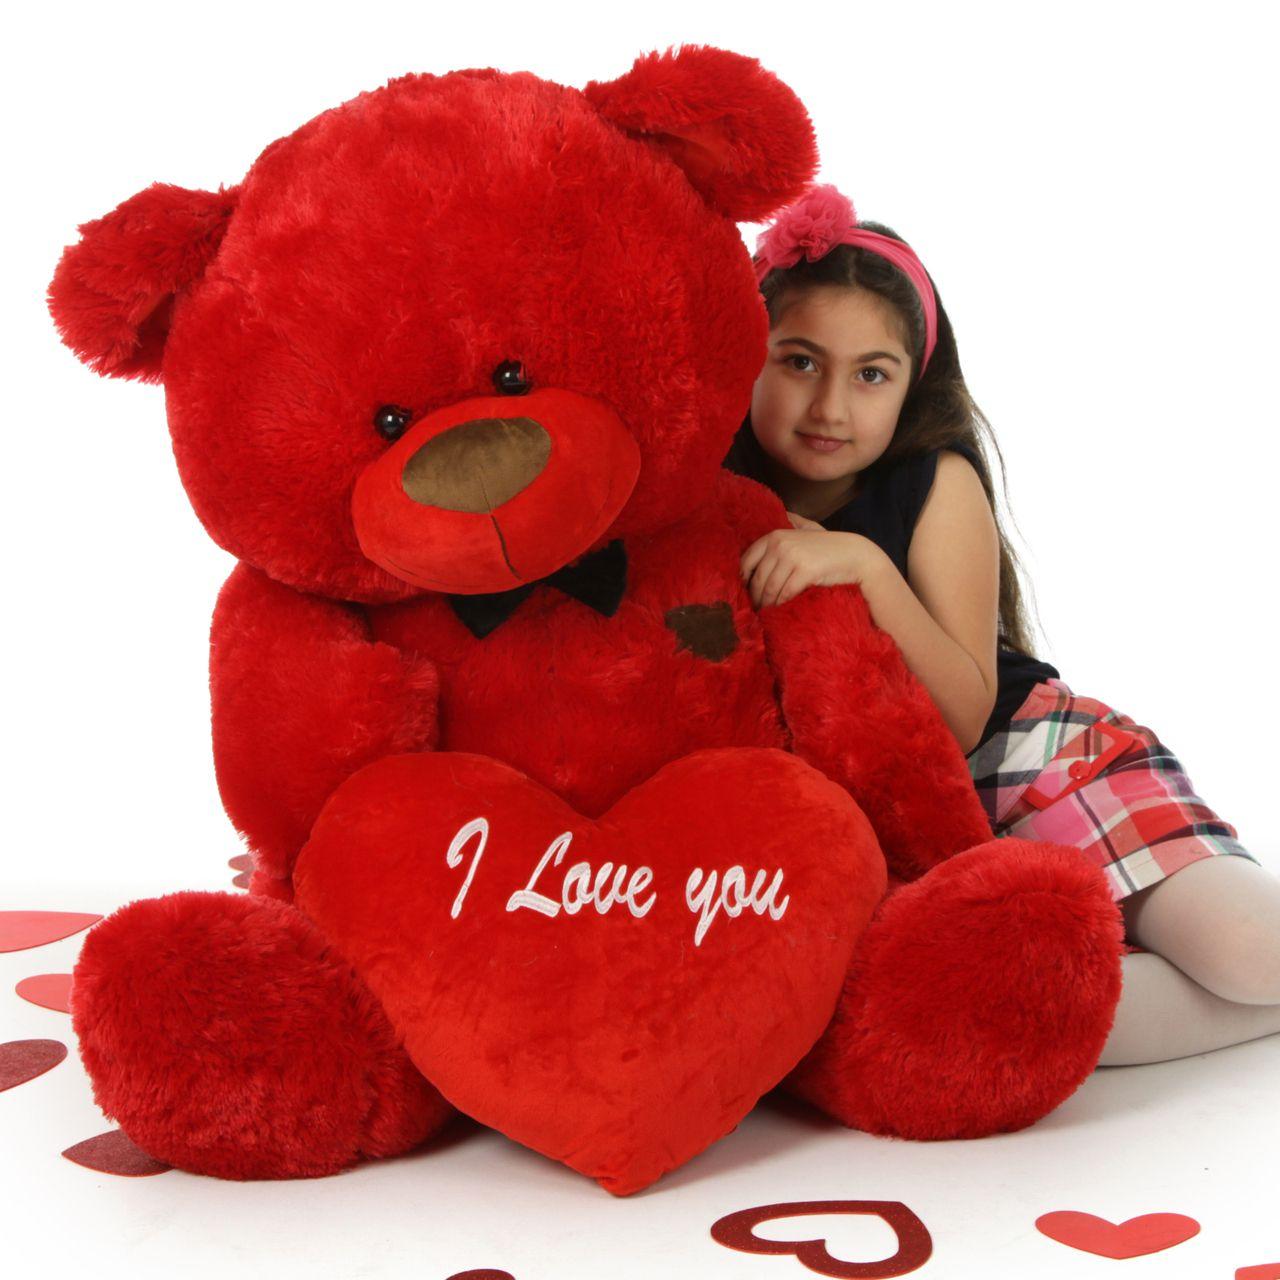 Red and Bear w Logo - Big Red Valentine's Teddy Bear with bow tie and plush I Love You ...